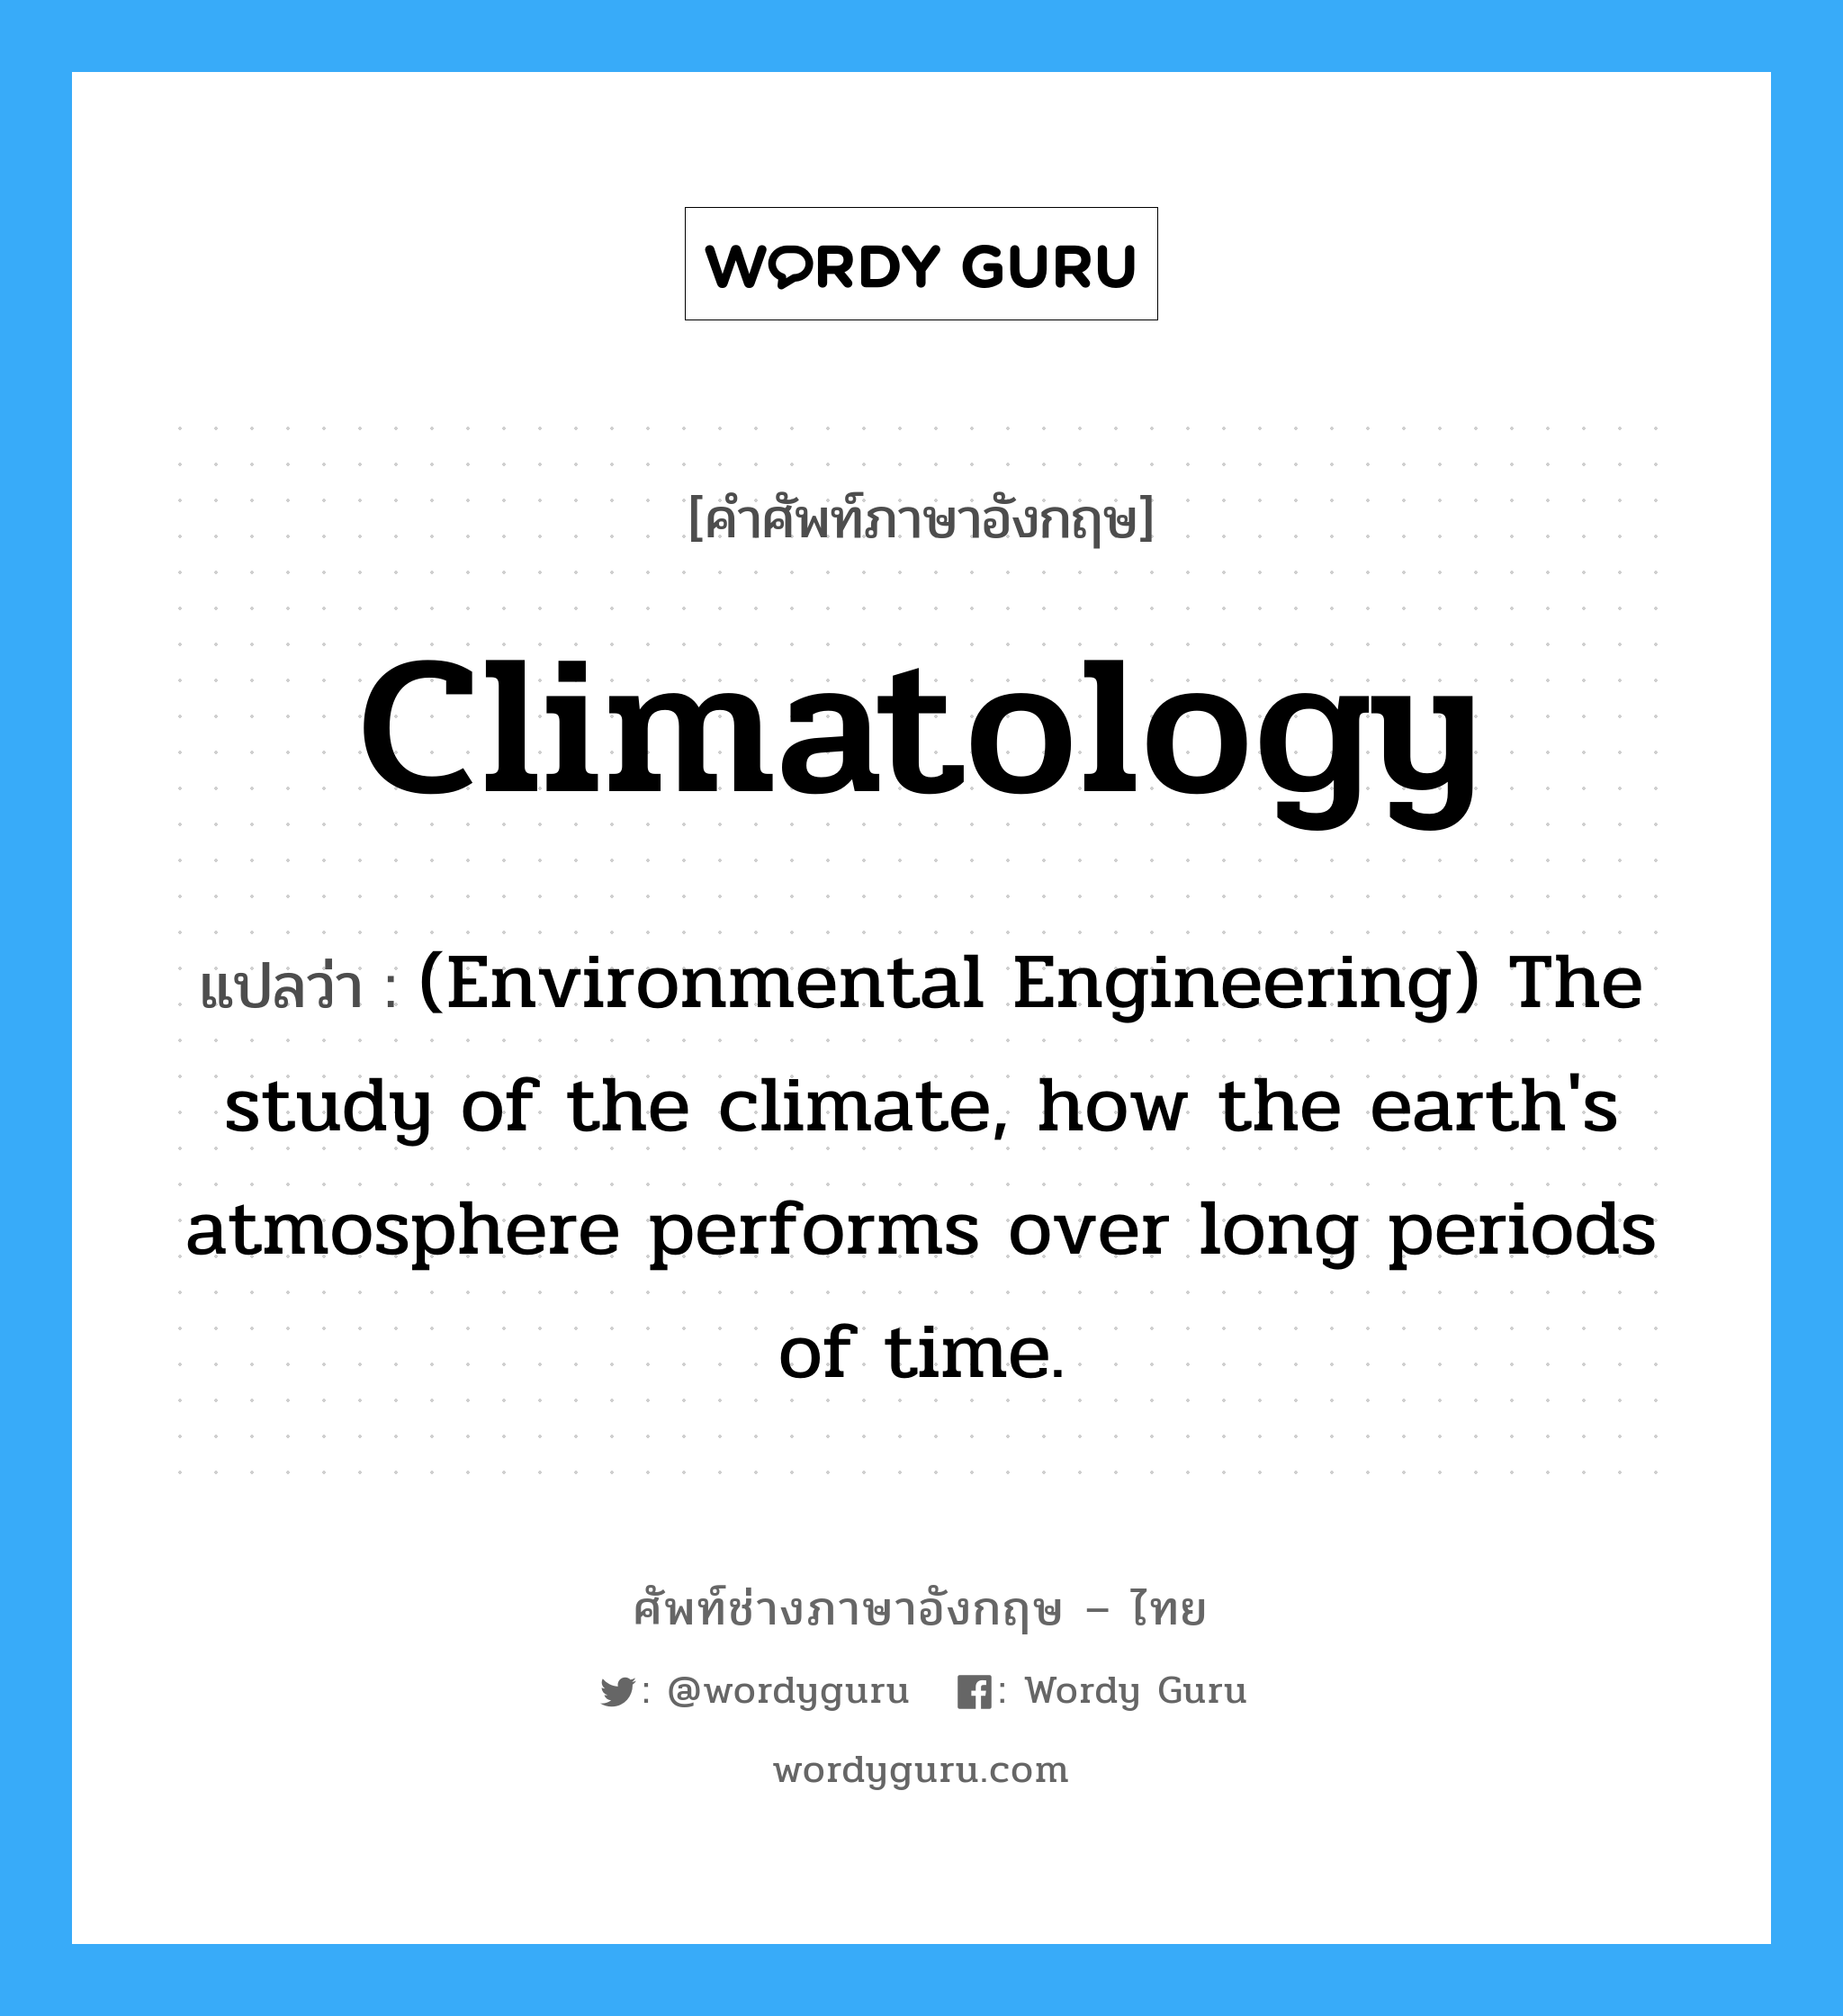 Climatology แปลว่า?, คำศัพท์ช่างภาษาอังกฤษ - ไทย Climatology คำศัพท์ภาษาอังกฤษ Climatology แปลว่า (Environmental Engineering) The study of the climate, how the earth's atmosphere performs over long periods of time.